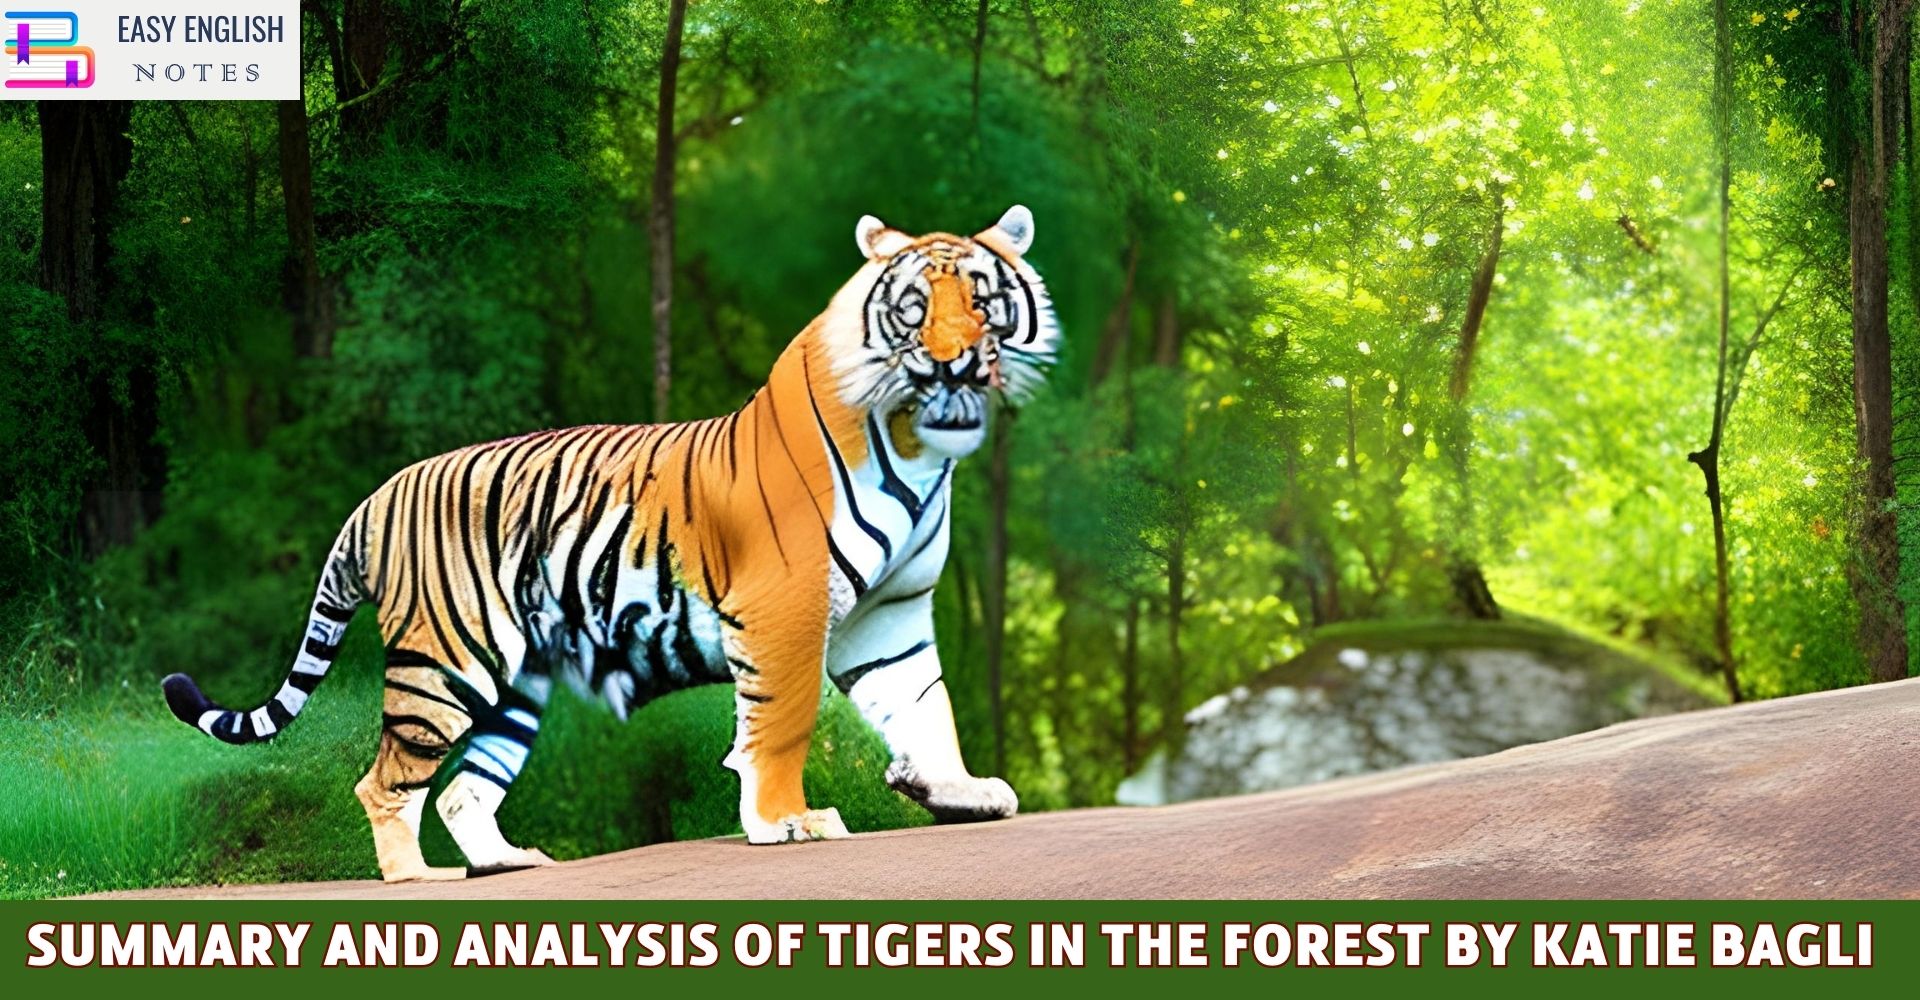 Summary And Analysis Of Tigers In The Forest by Katie Bagli